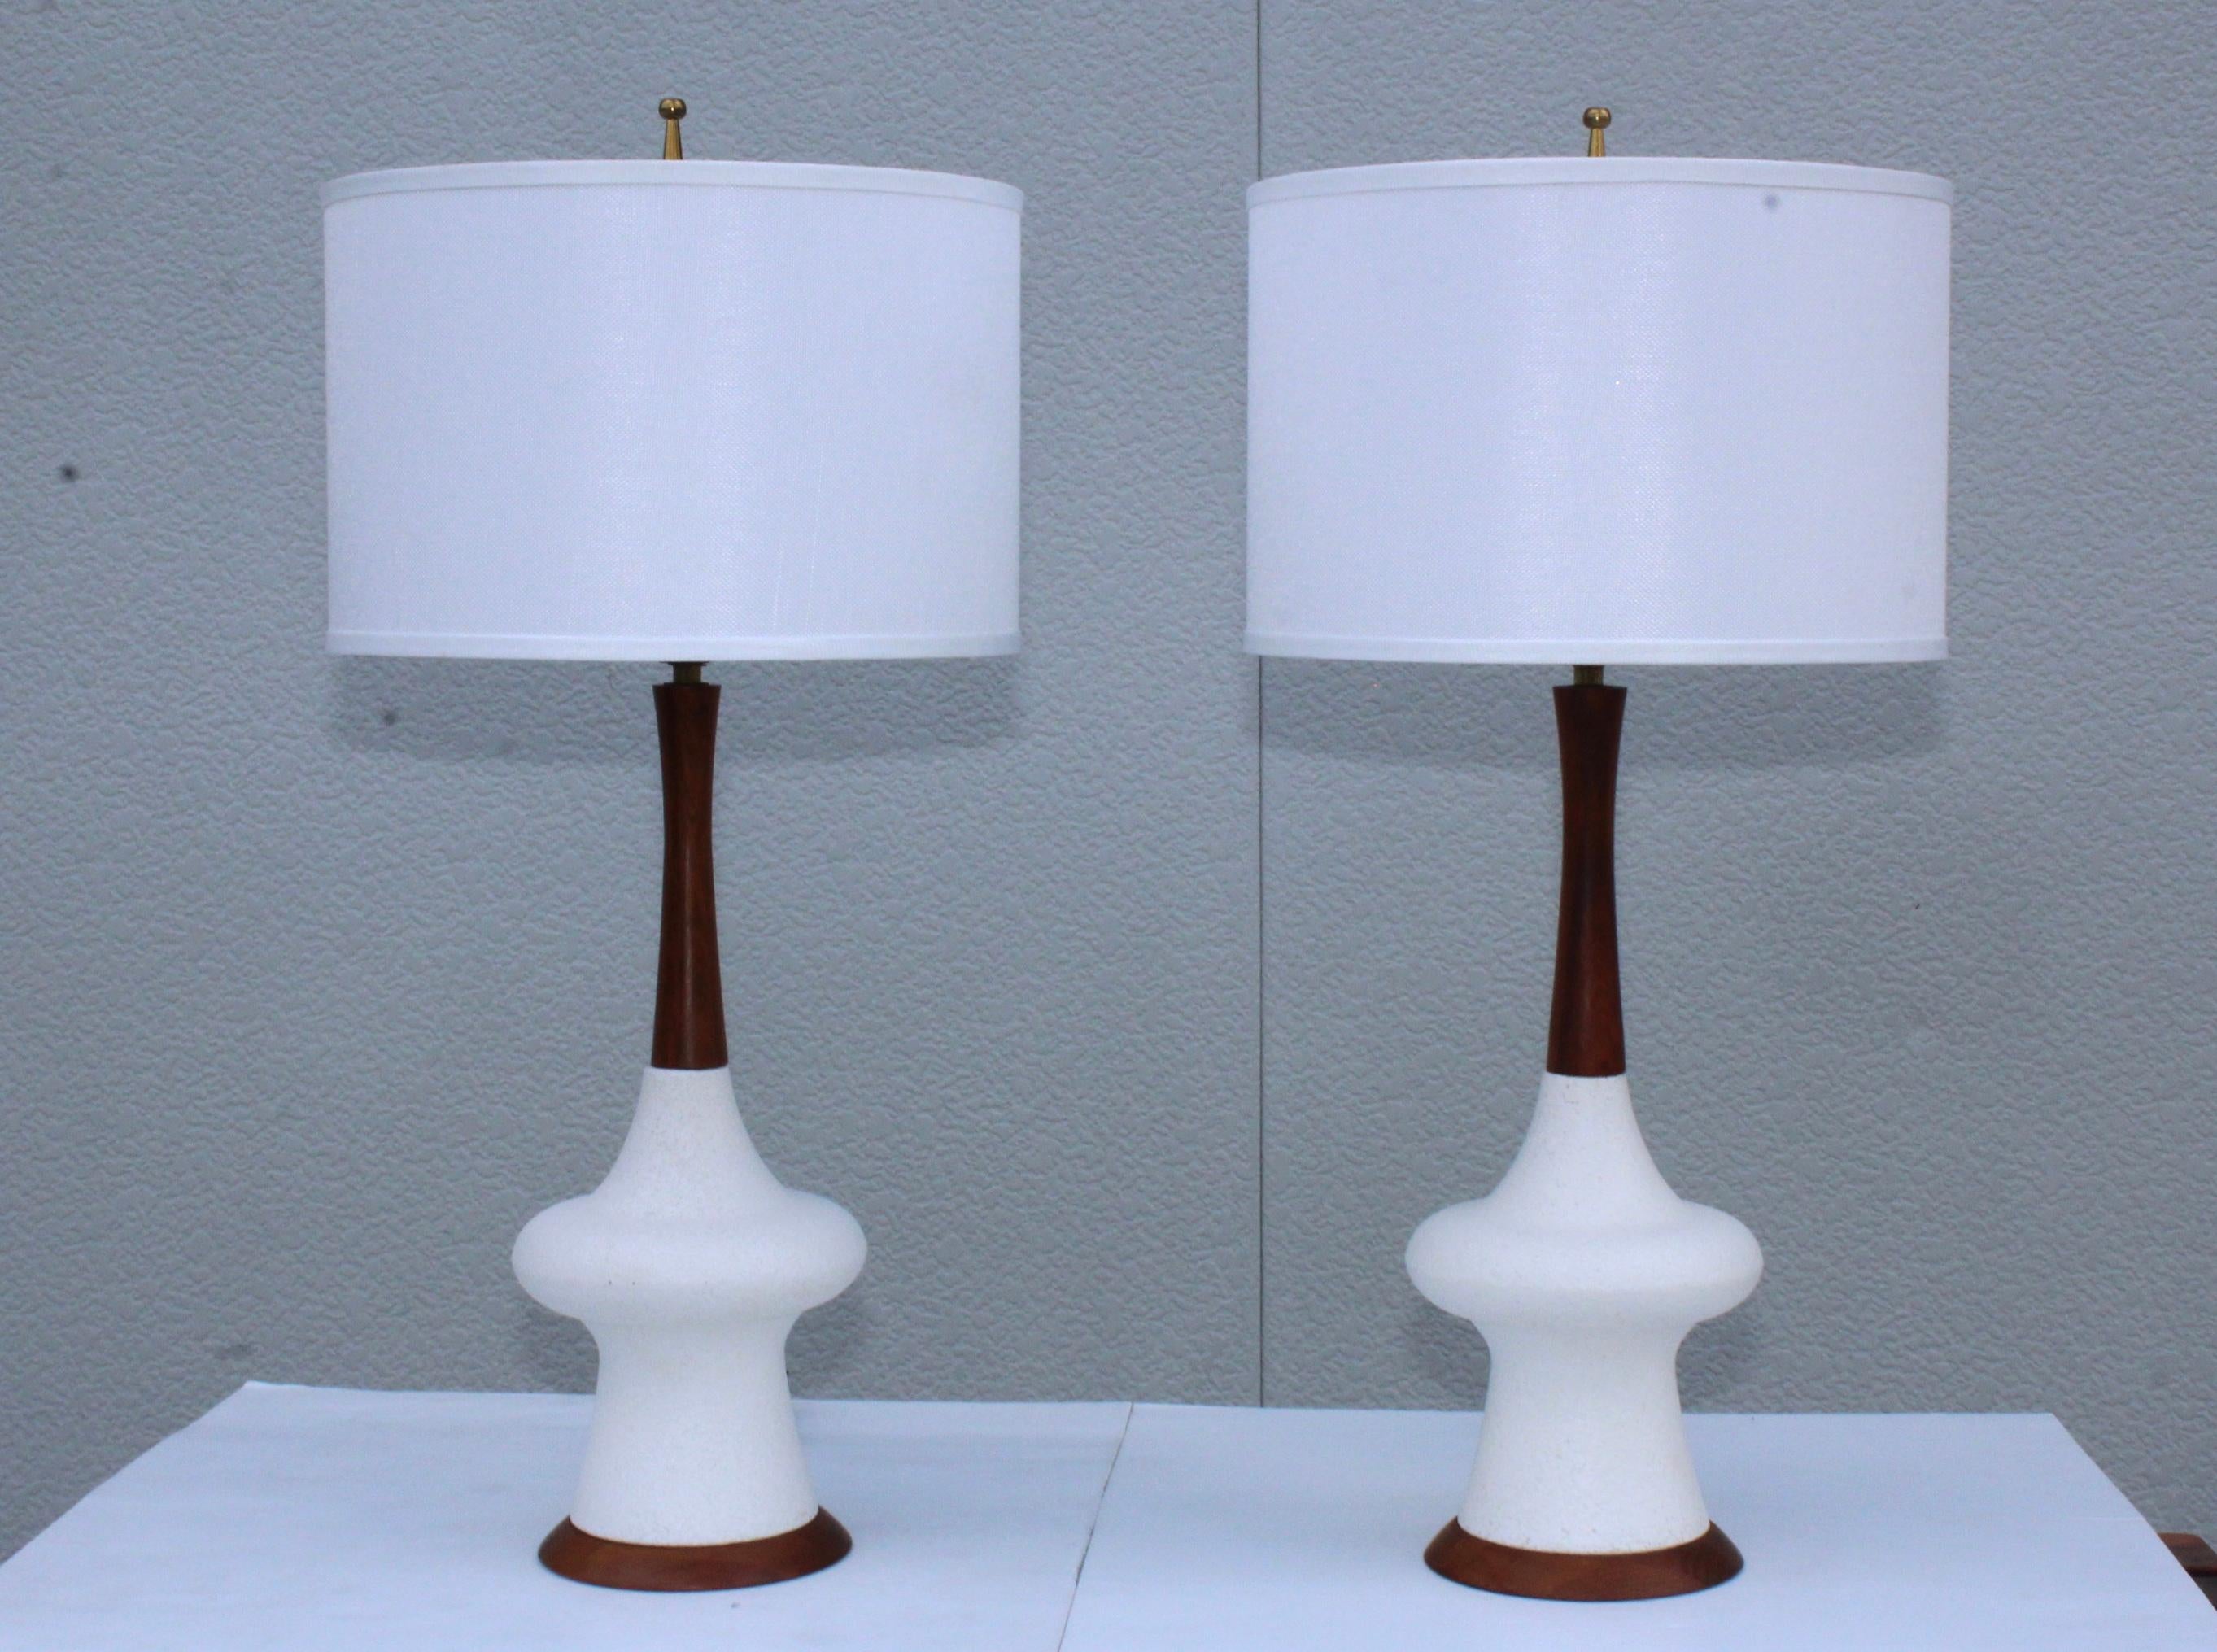 1960's Mid-Century Modern Danish style white pottery and walnut table lamps.

Height to light socket 23